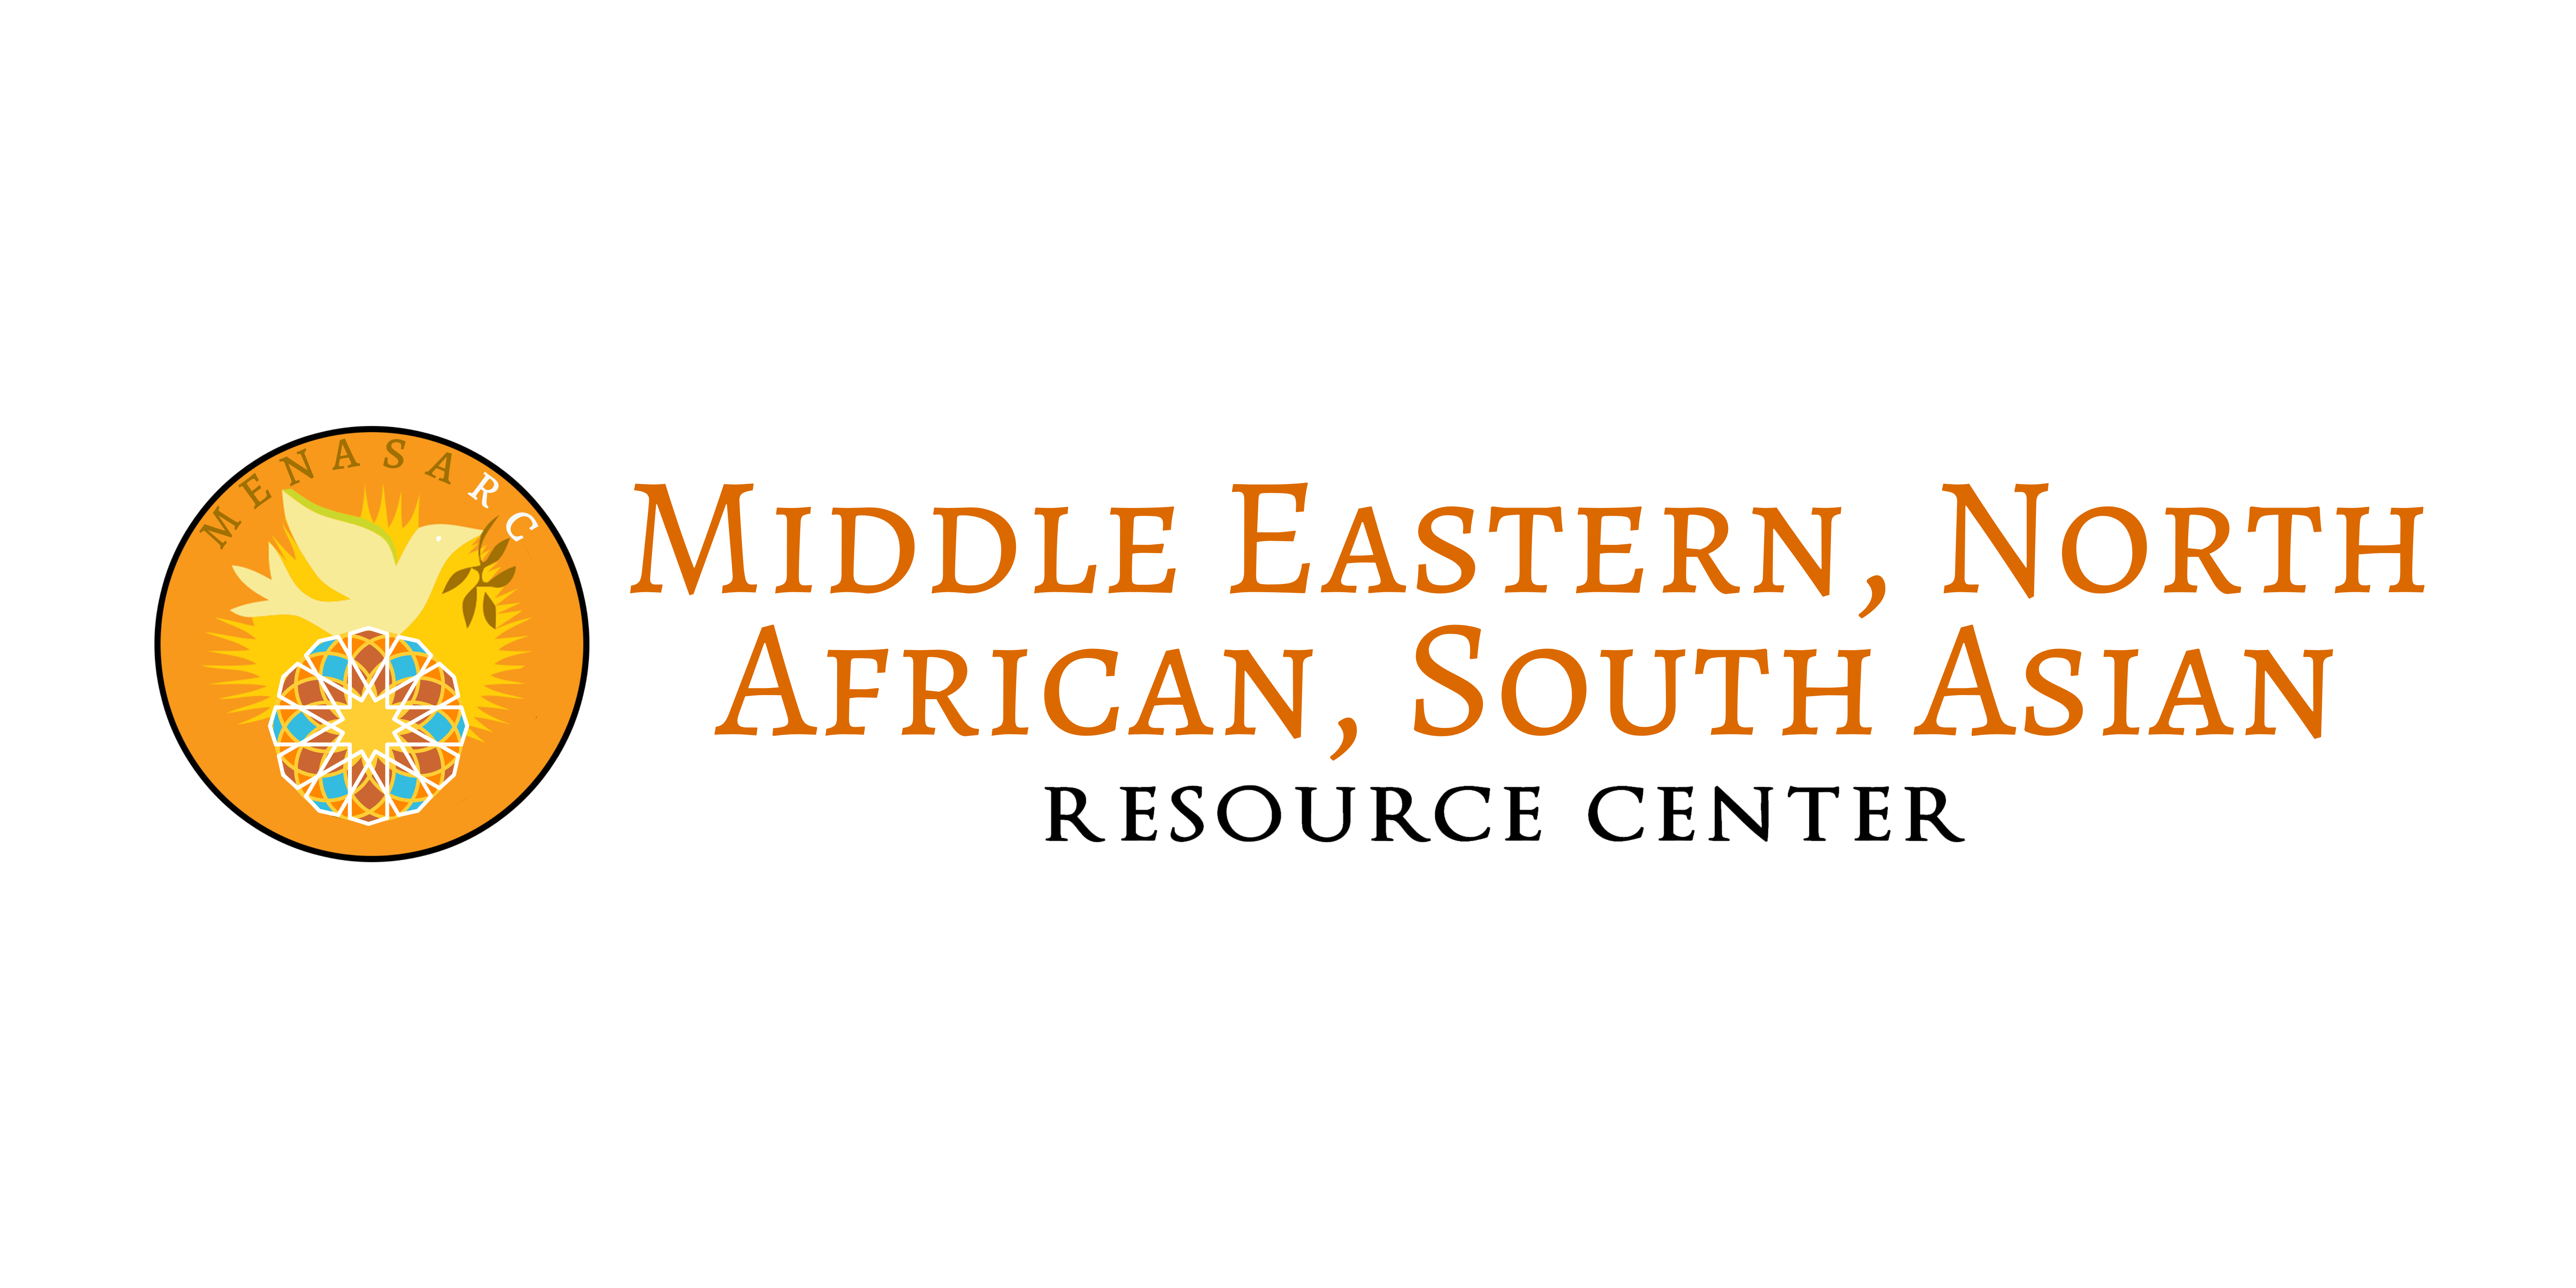 Middle Eastern, North African, South Asian Resource Center (MENASARC) logo